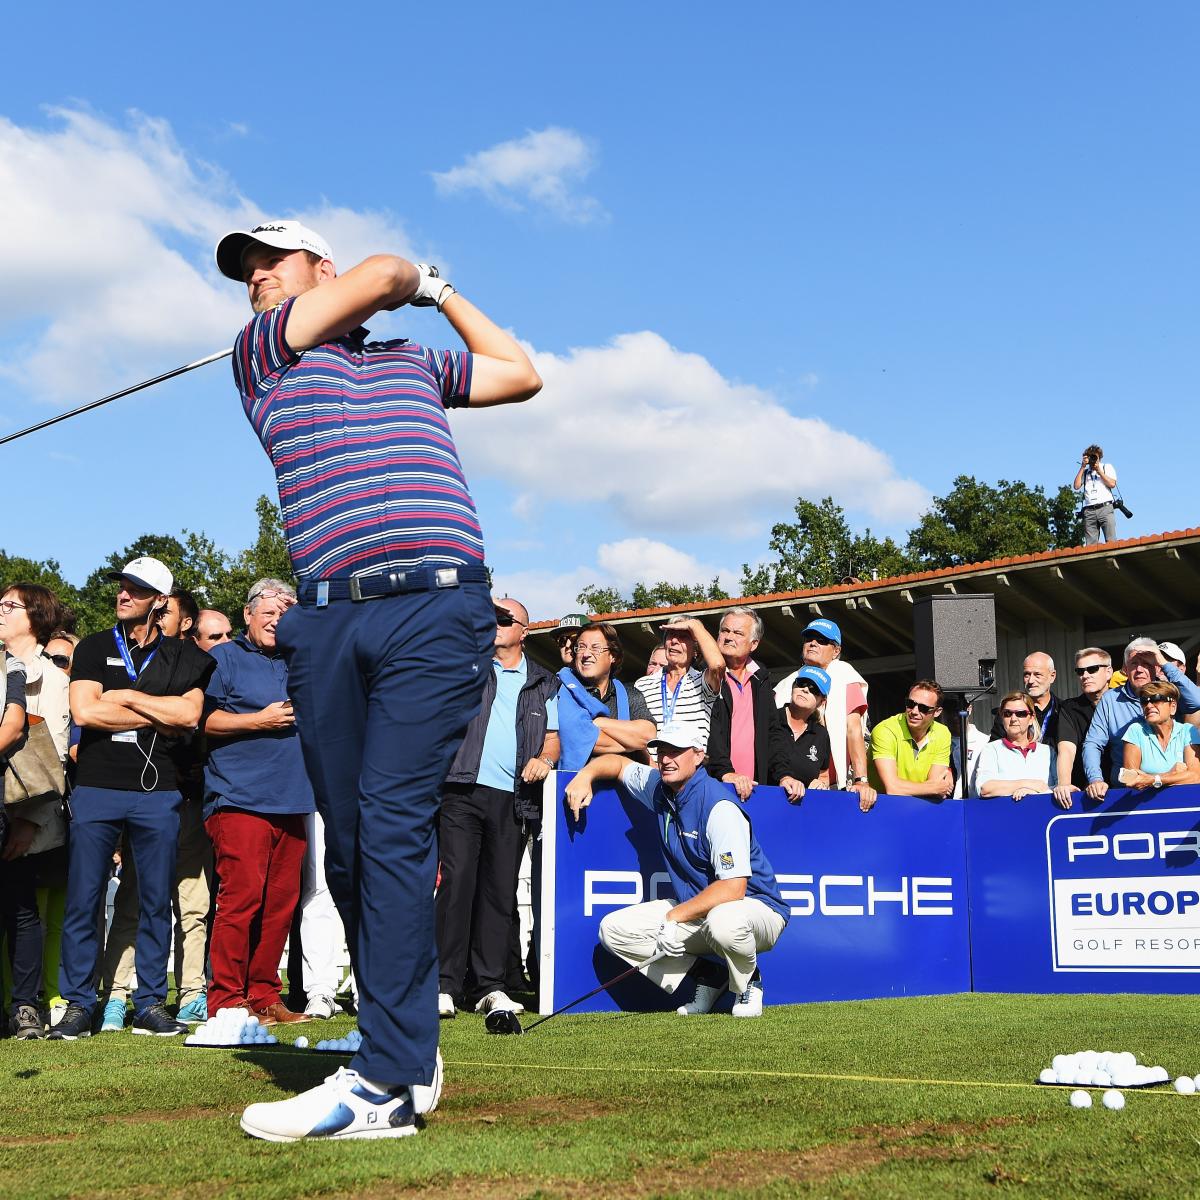 European Open 2016 Thursday Leaderboard Scores And Highlights News Scores Highlights Stats 